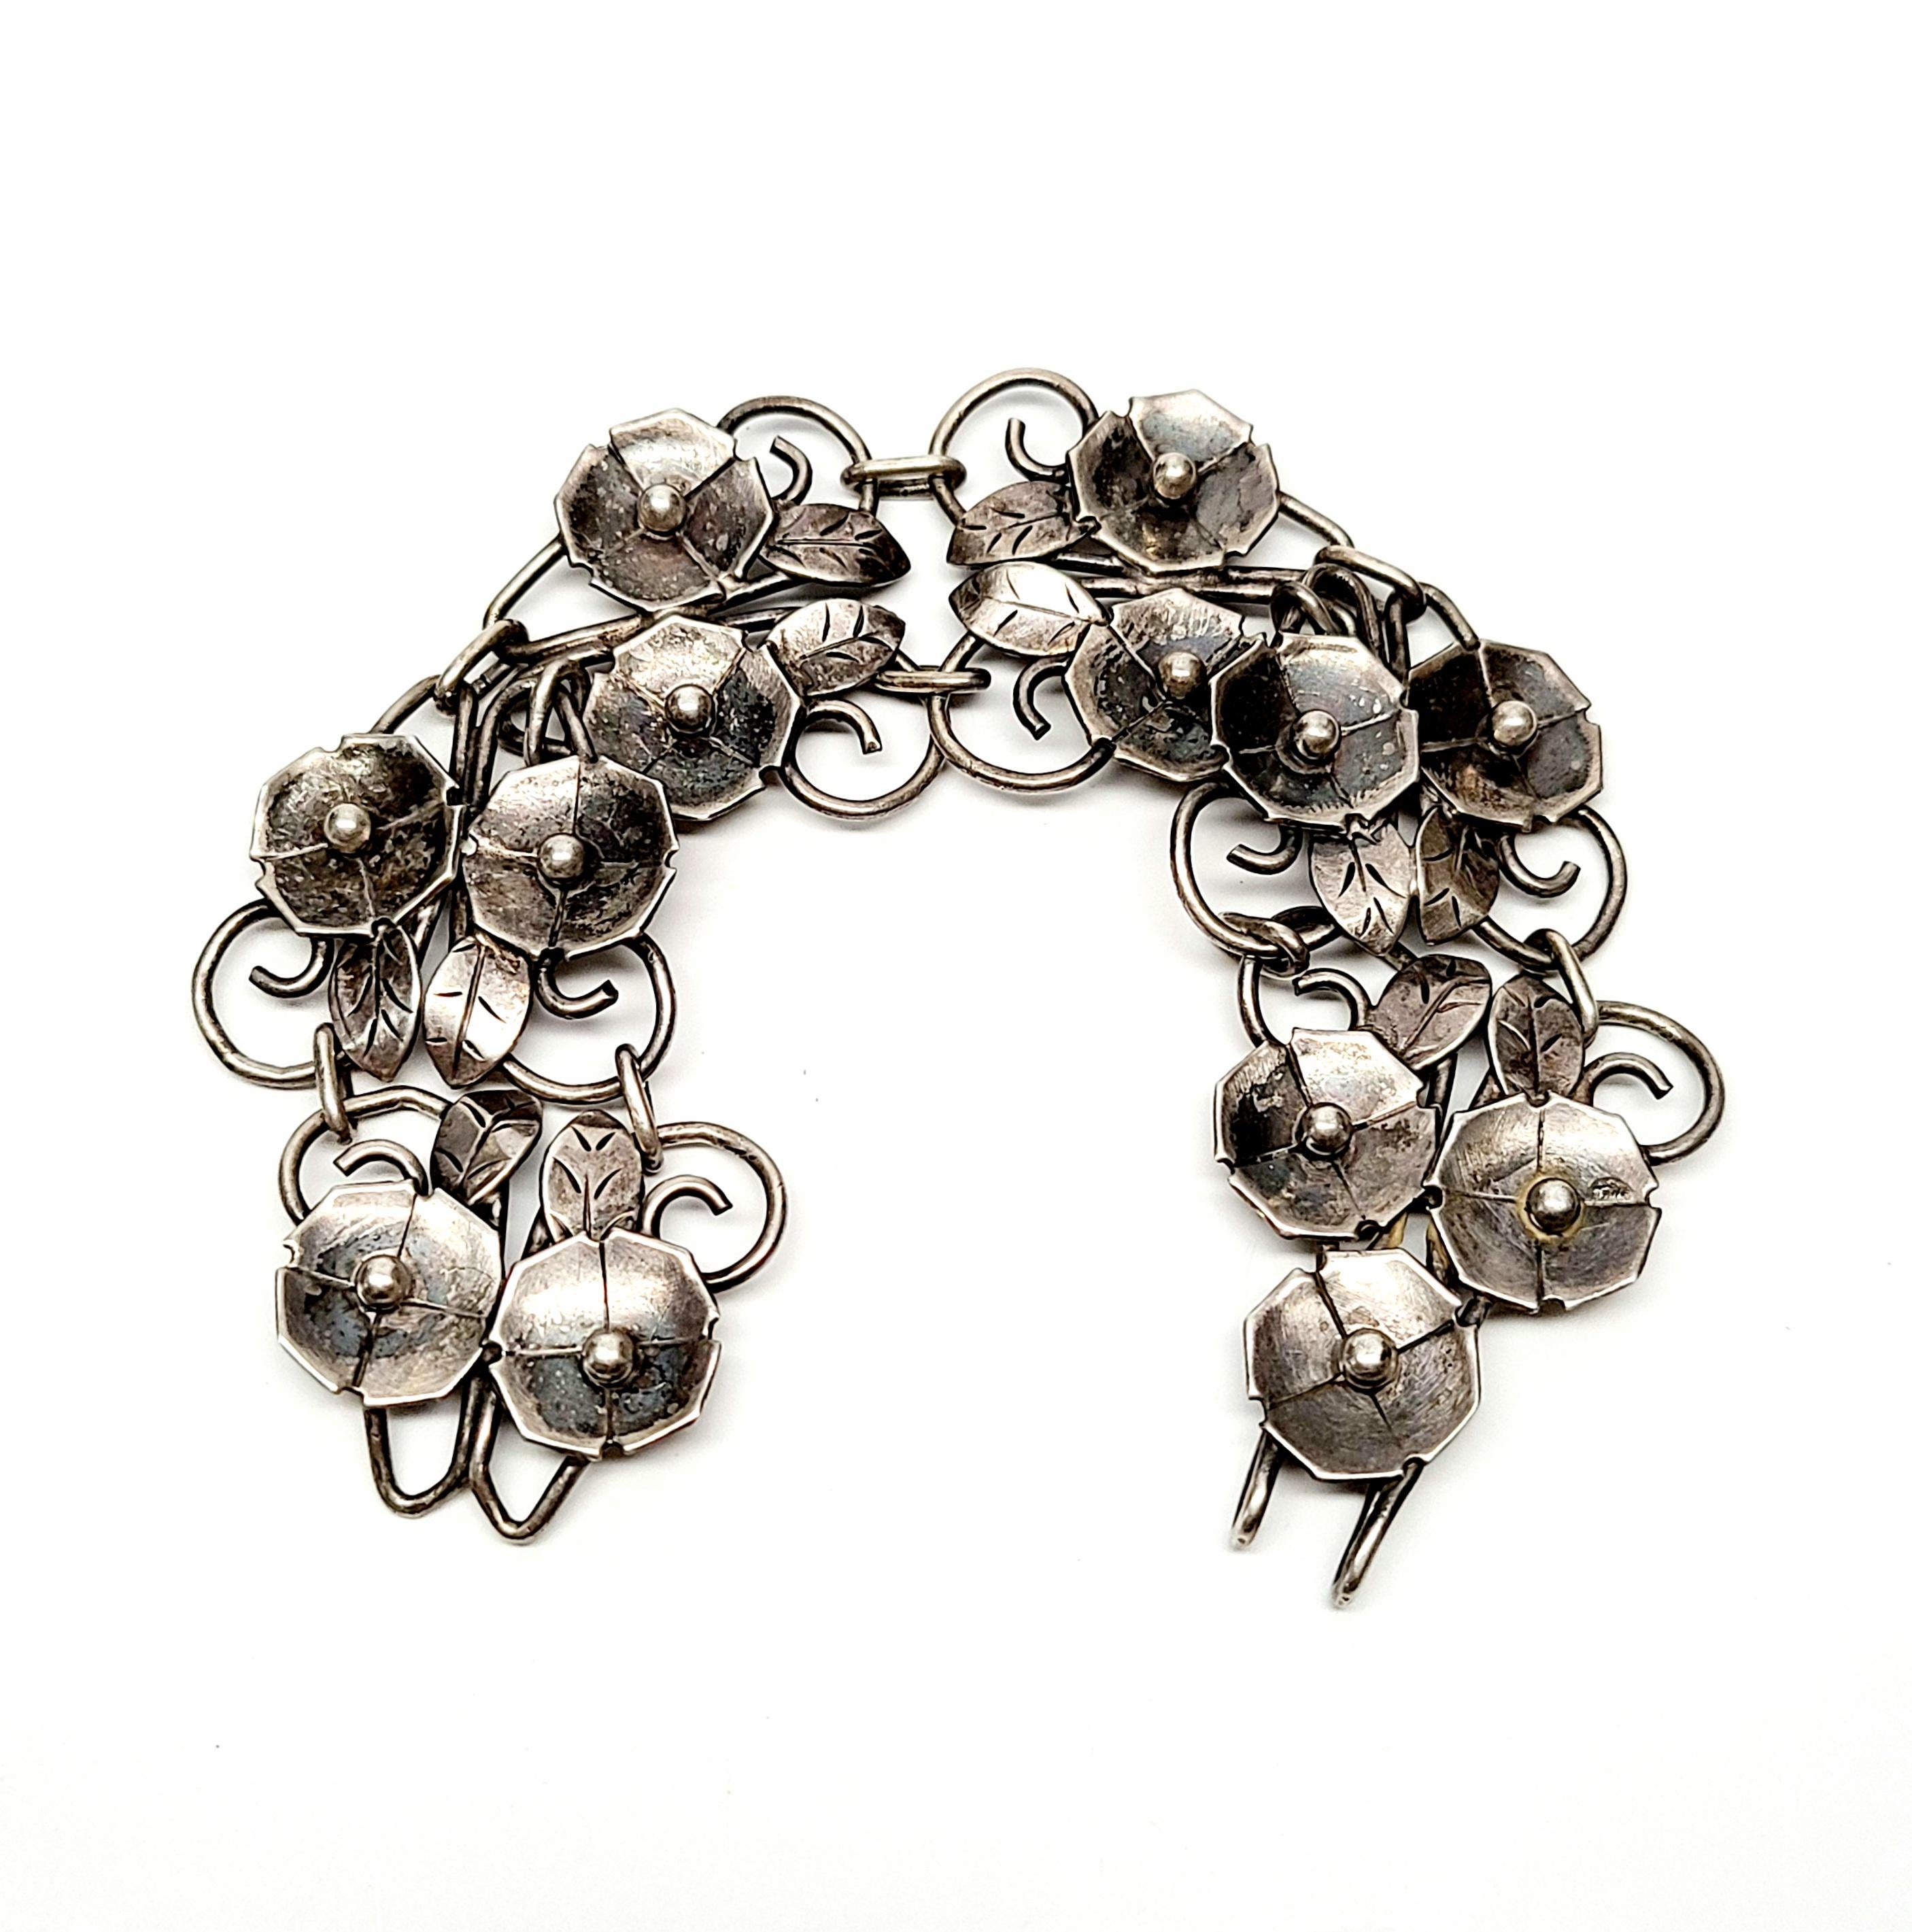 Handwrought sterling silver wide flower bracelet.

Beautiful double flower links, flowers and leaves are simple, yet detailed.

Measures approx 7